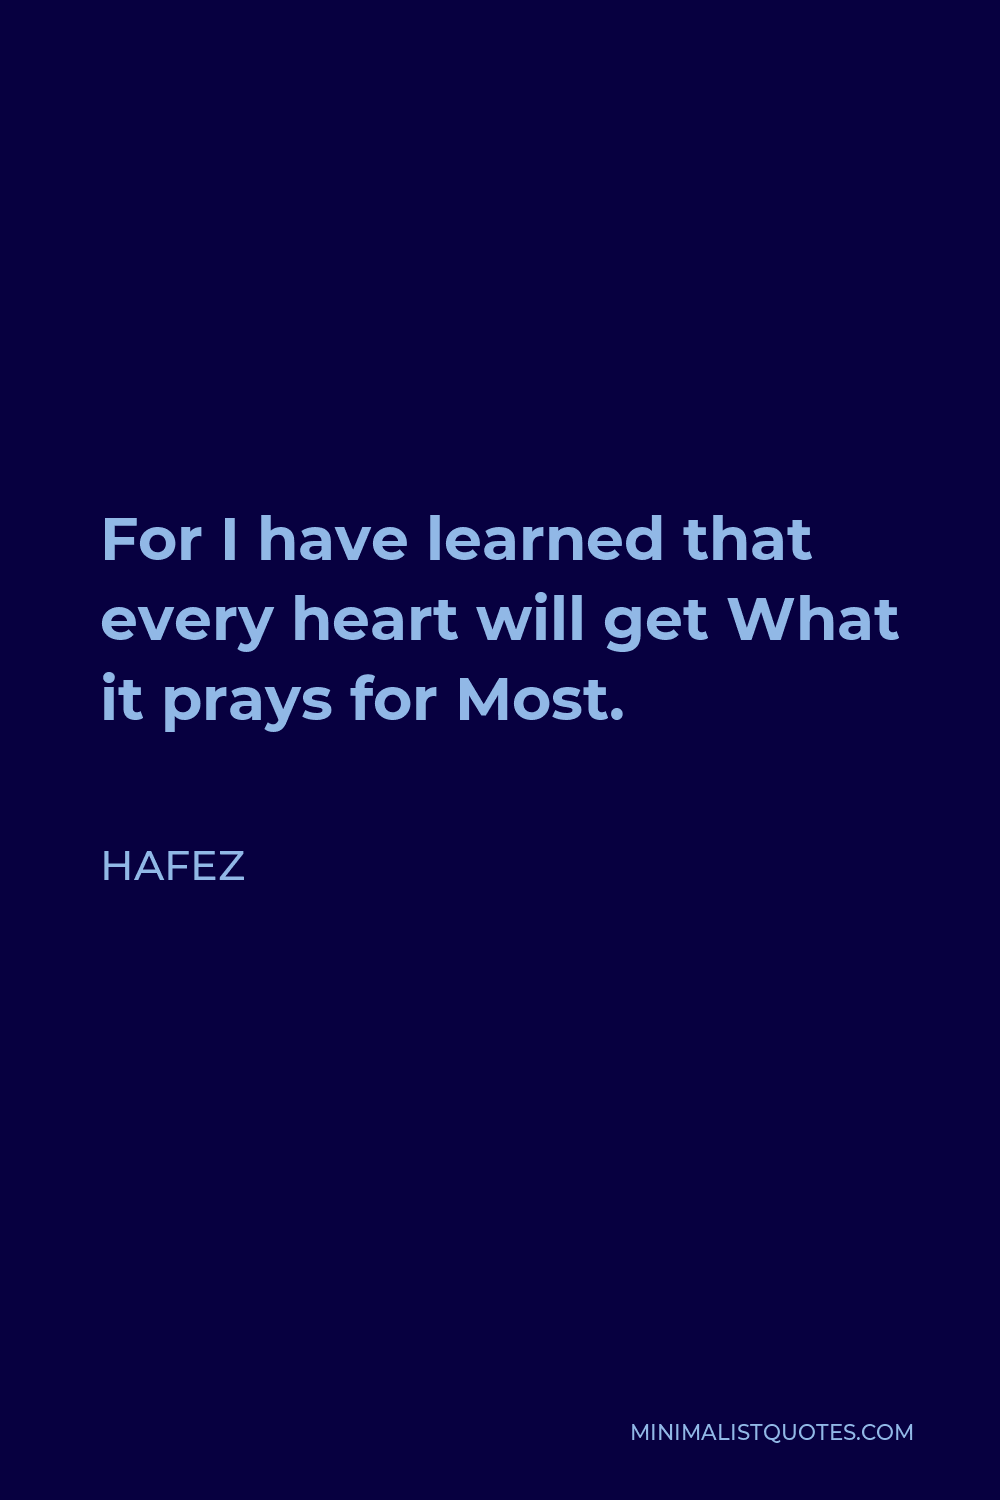 Hafez Quote - For I have learned that every heart will get What it prays for Most.